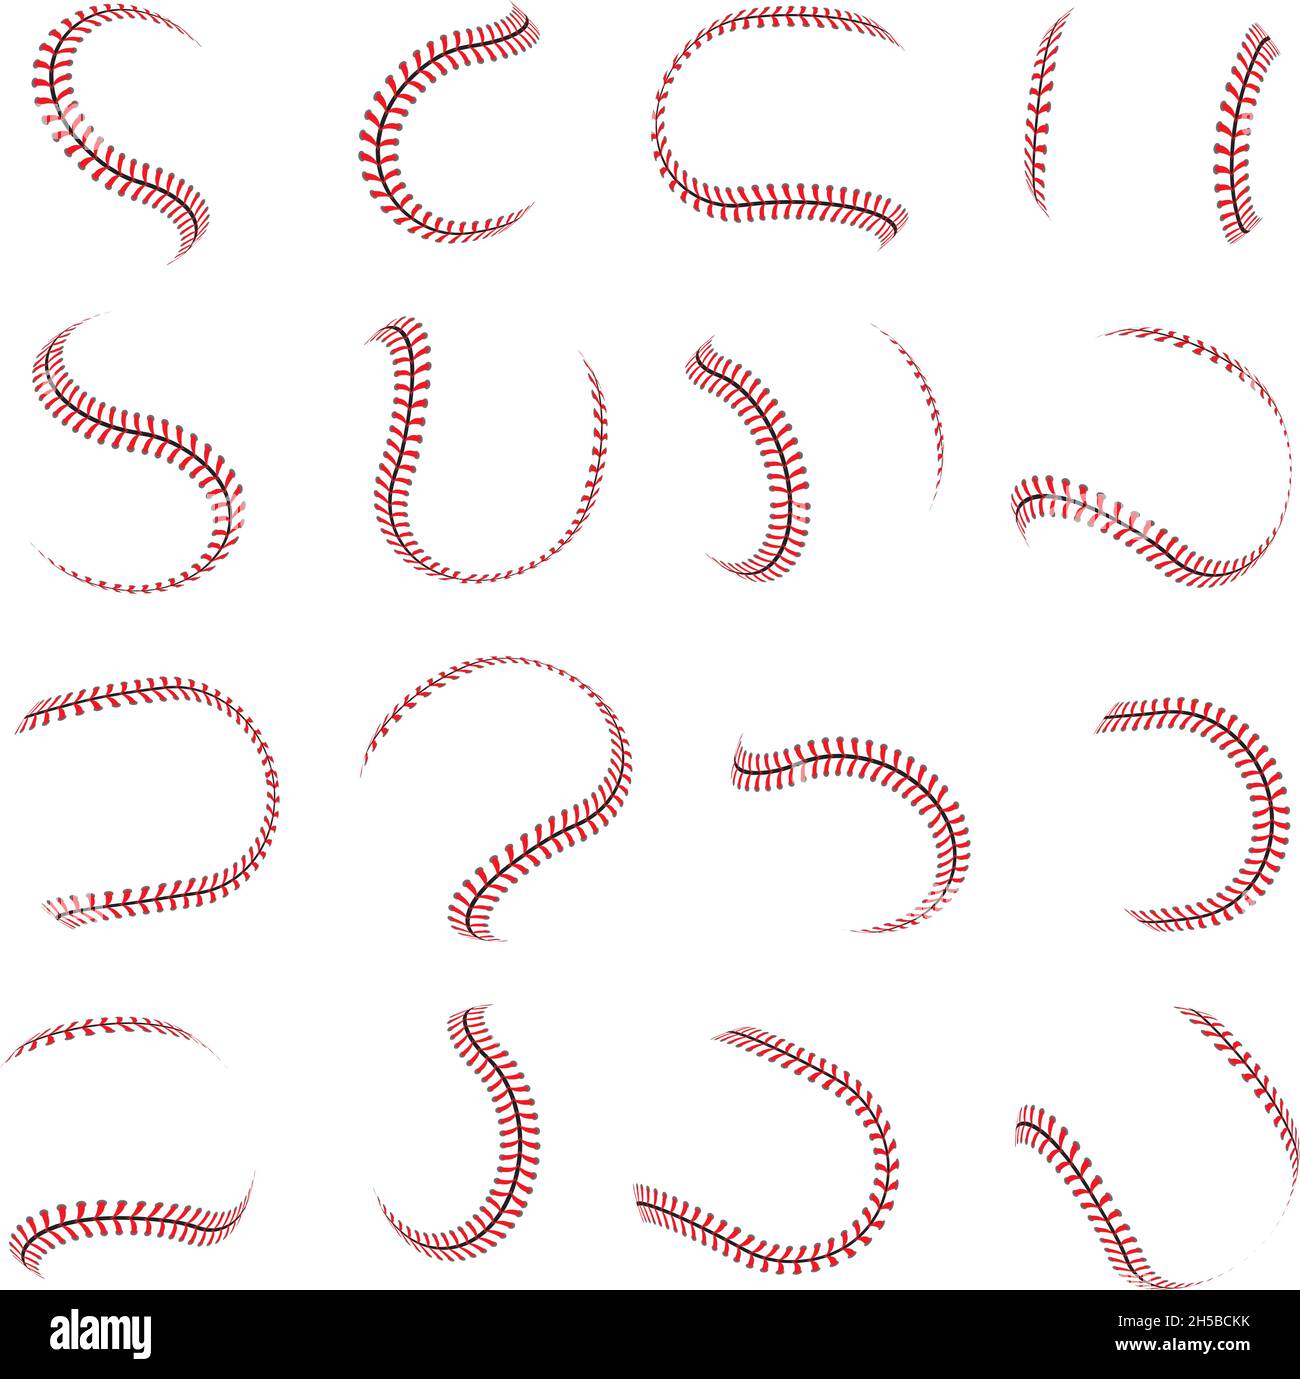 Ball lace. Red stitching for sport baseball lacing graphic pattern softball recent vector stylized symbols set for design projects Stock Vector